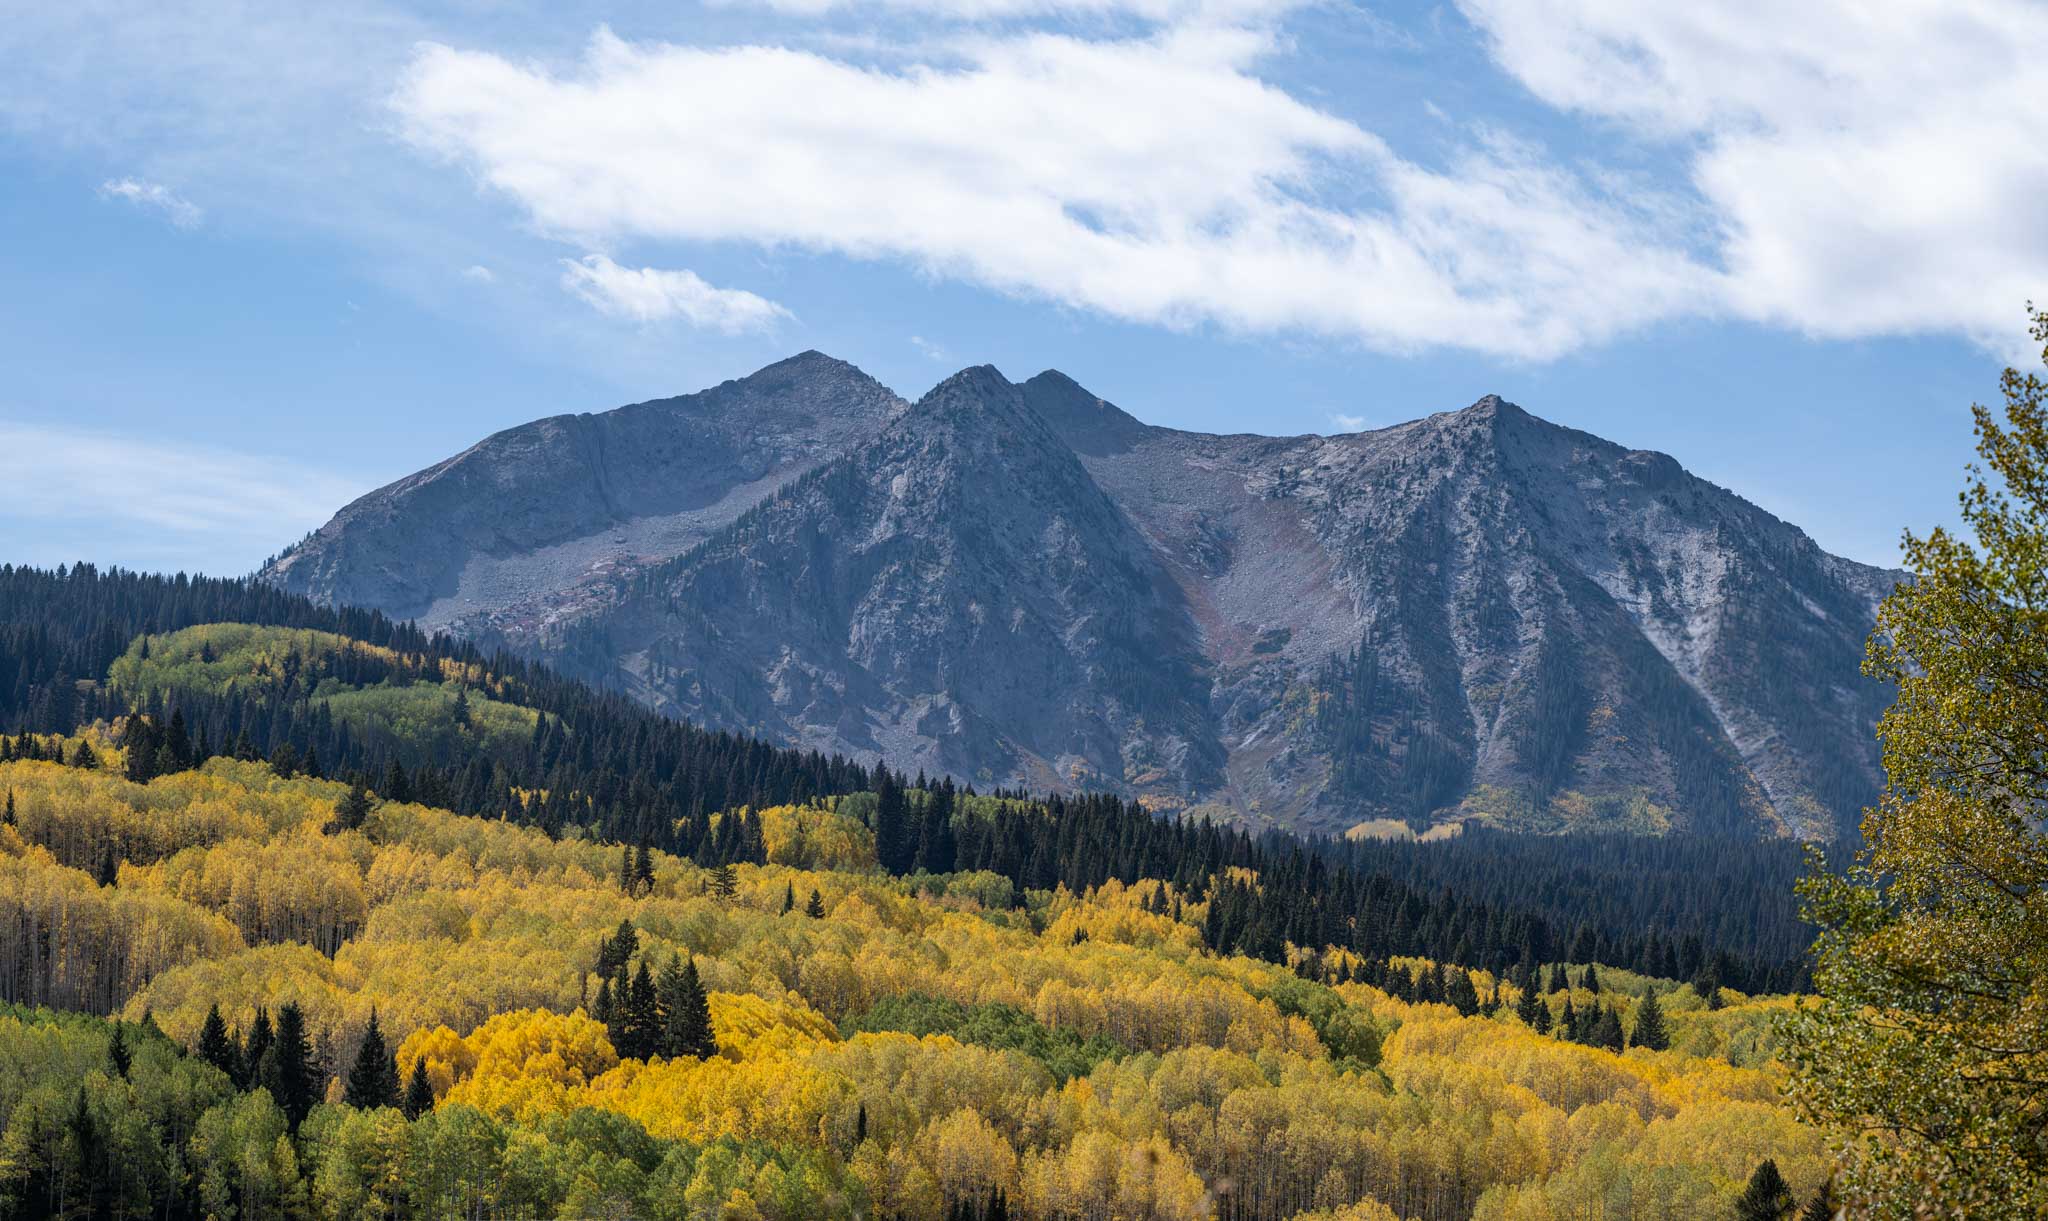 a mountain range with trees and yellow leaves